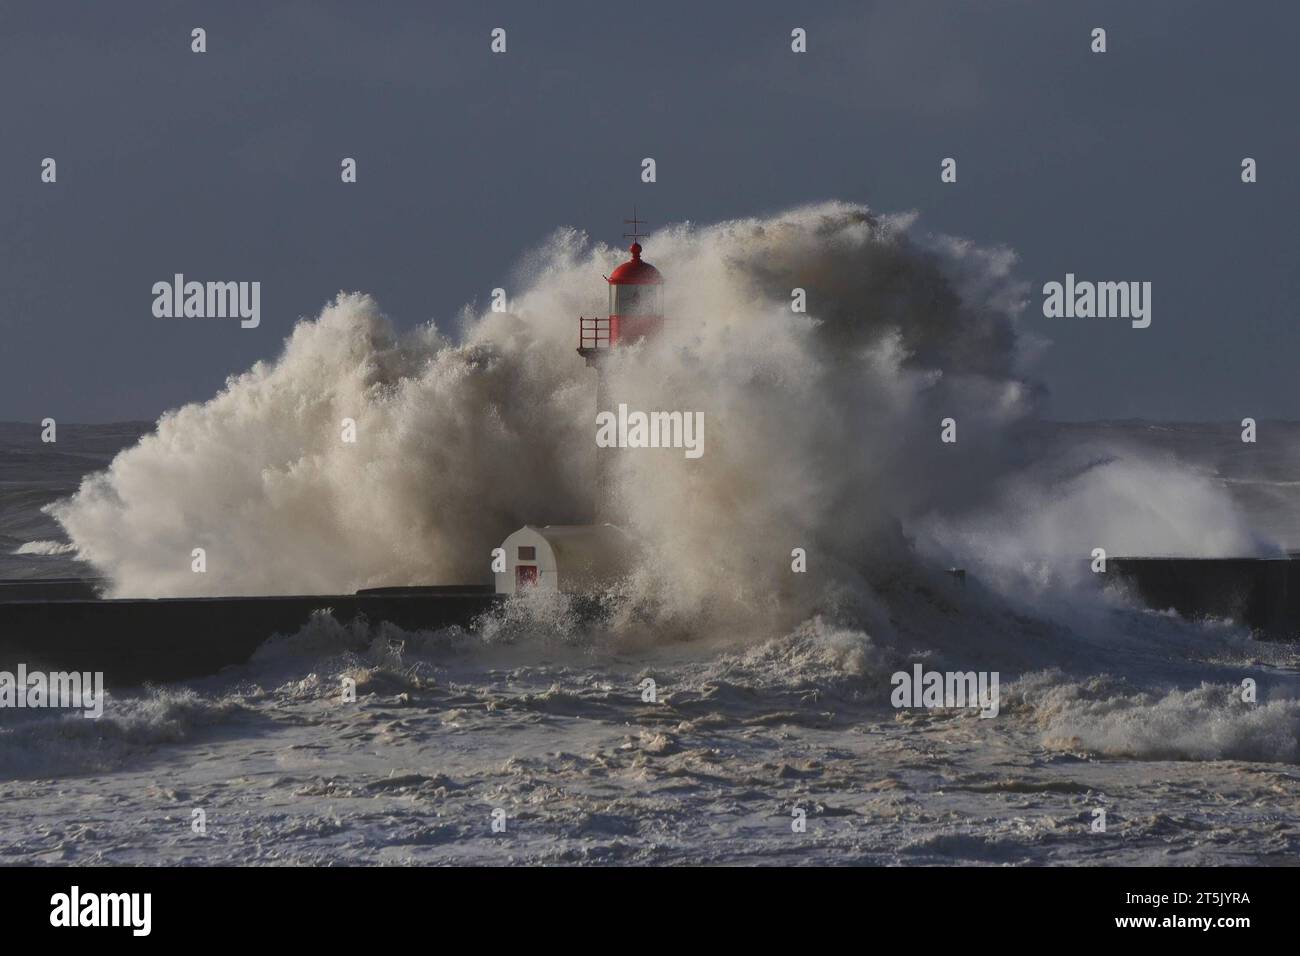 PRT - PORTUGAL/CLIMATE - INTERNATIONAL PRT - PORTUGAL/WEATHER - INTERNATIONAL - Bad weather causes strong waves in the sea at Farol de Felgueiras, located in Foz do Ouro, in Porto, Portugal, this Sunday, 05. 05/11/2023 - Photo: RAURINO MONTEIRO/ATO PRESS/ STATE CONTENT PRT - PORTUGAL/CLIMATE - INTERNATIONAL Harbor Copyright: xRaurinoxMonteirox Credit: Imago/Alamy Live News Stock Photo